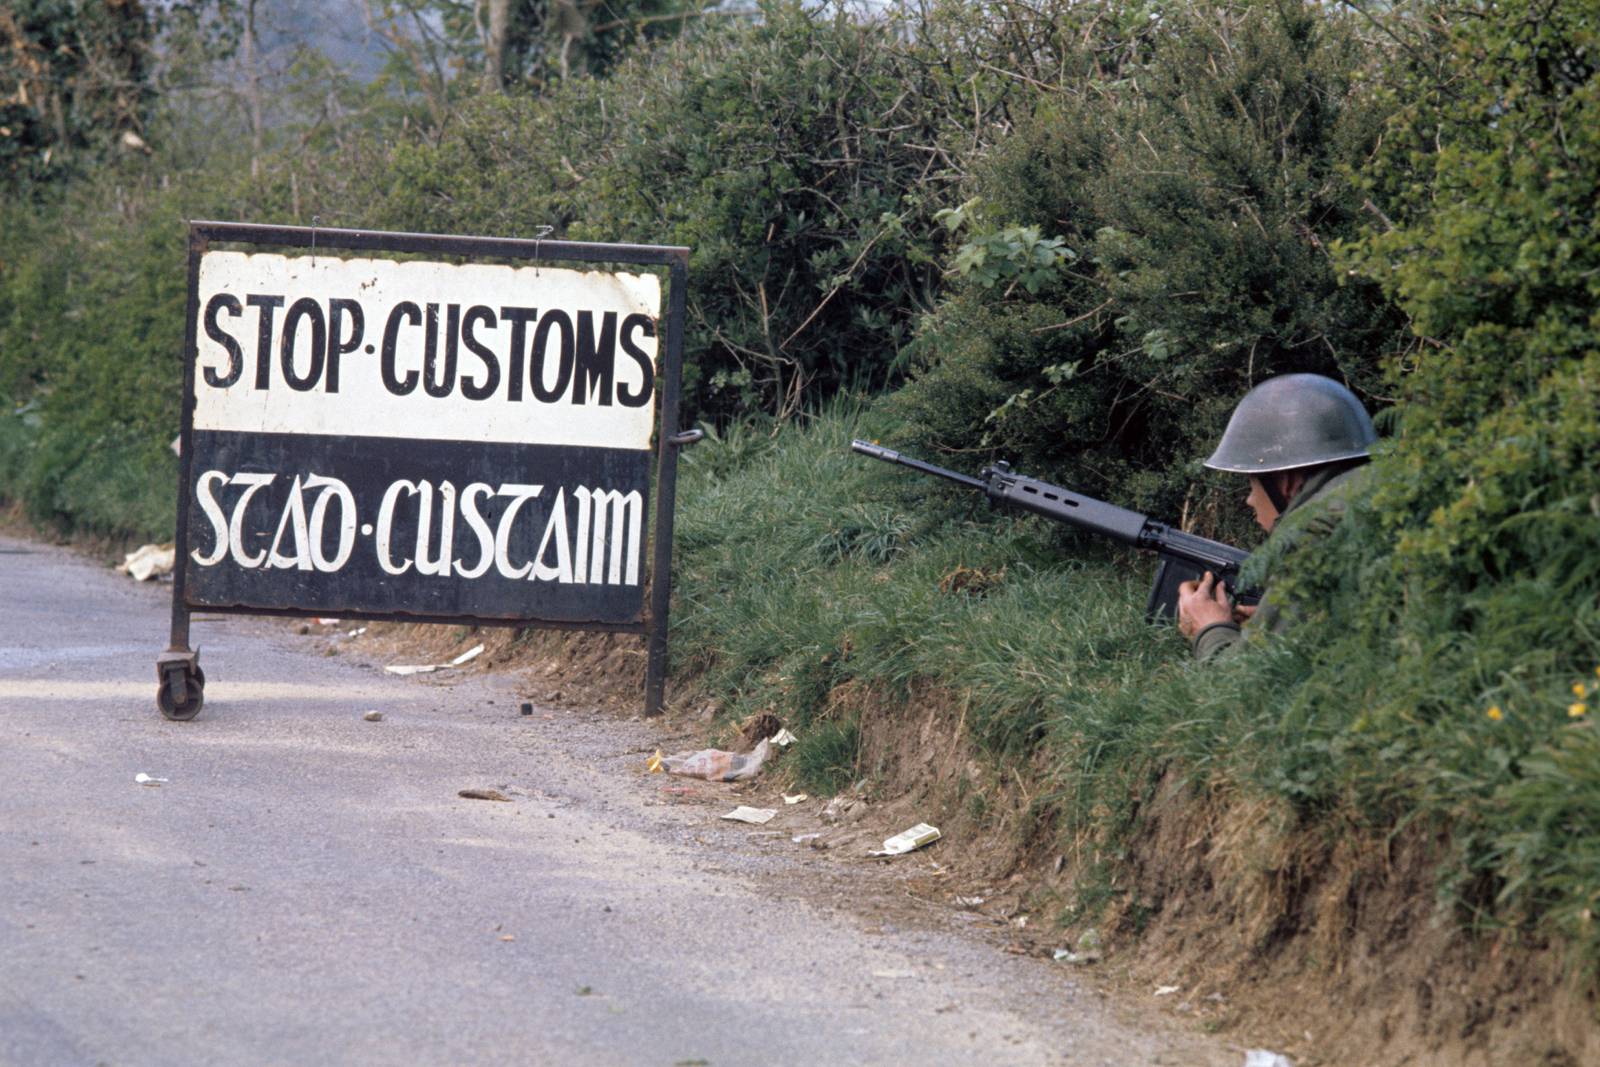 File photo dated 01/04/1974 of a soldier next to a customs post on the southern side of the Irish border with Ulster, at Swanlinbar, County Cavan. PRESS ASSOCIATION Photo. Issue date: Saturday January 26, 2019. Hundreds of protesters have warned Theresa May that a return to a hard Irish border risks destroying Northern Ireland's hard-won peace. See PA story POLITICS Brexit Border. Photo credit should read: PA Wire